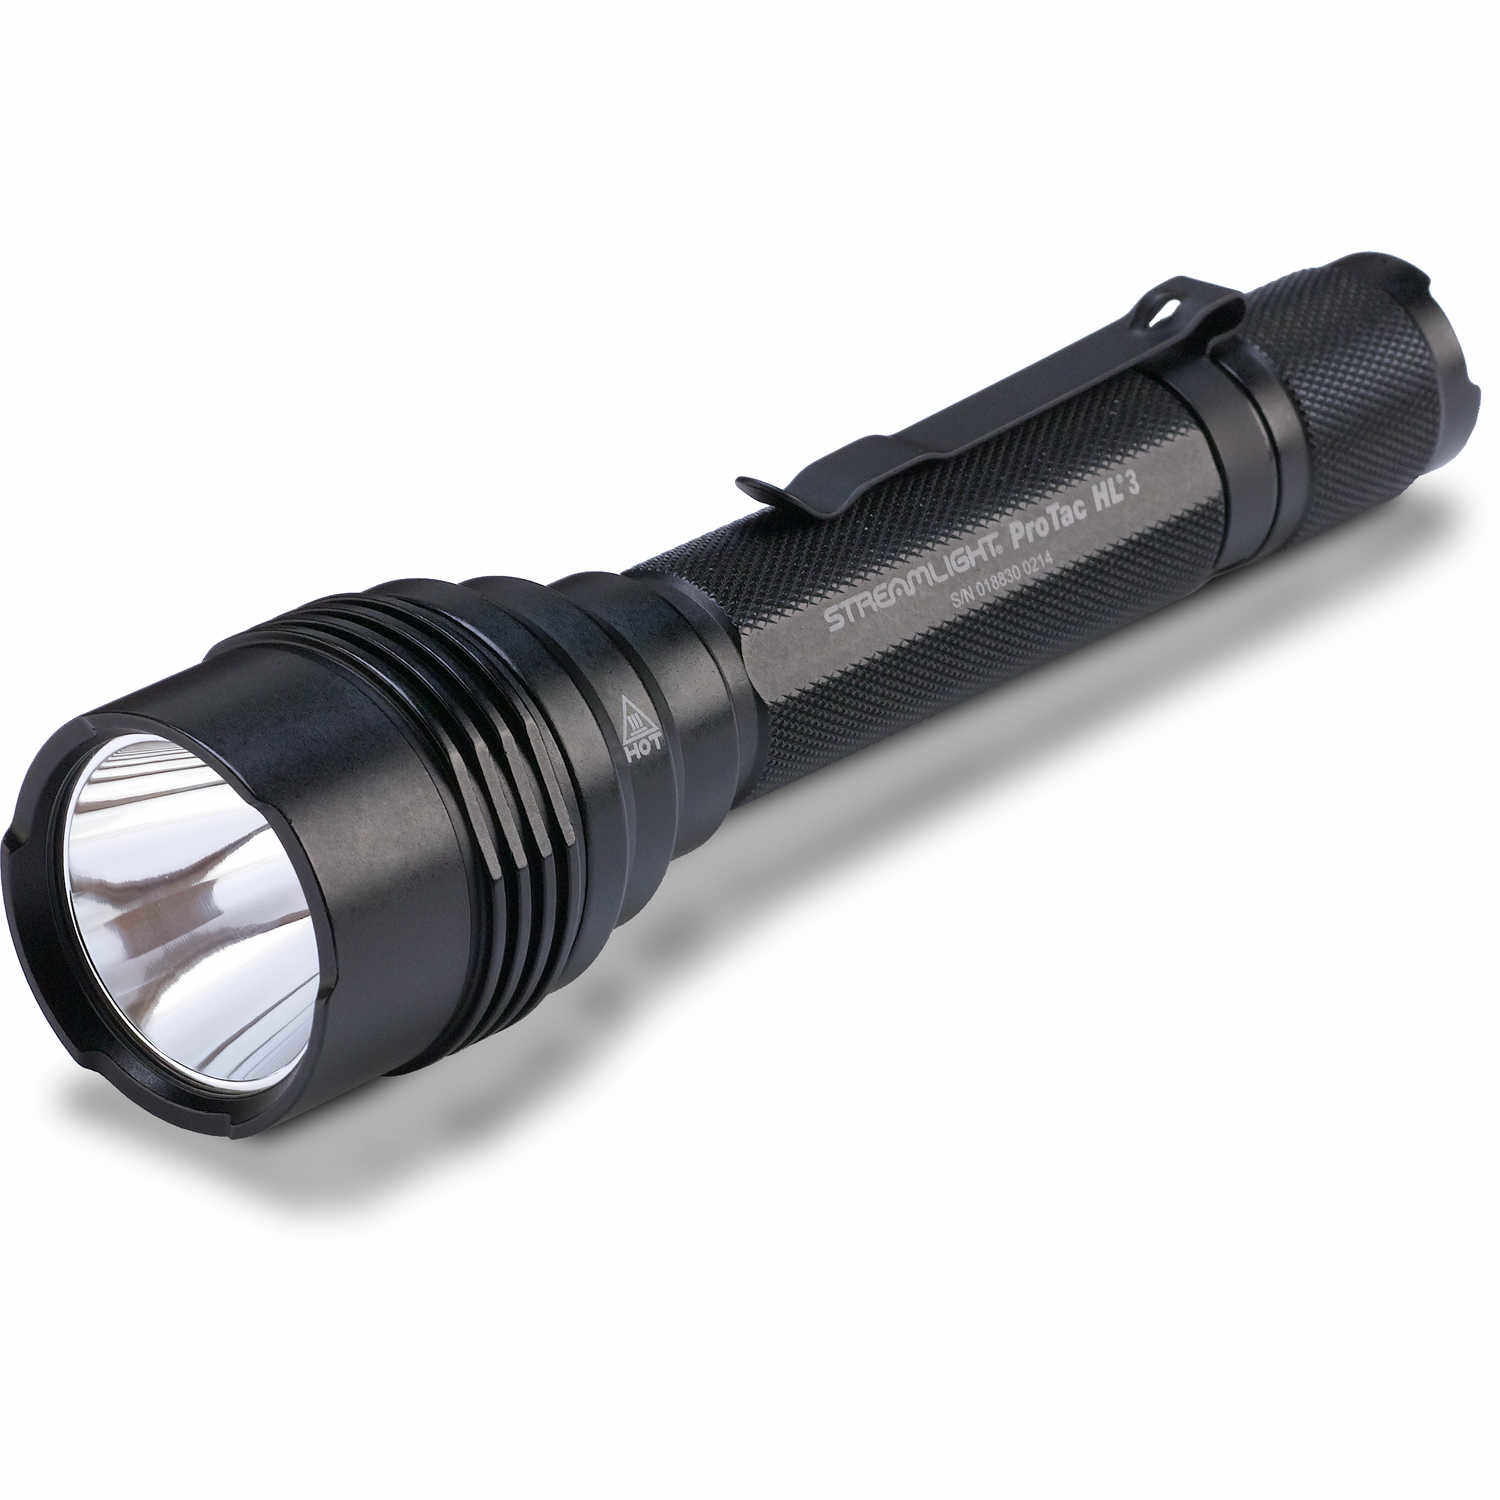 Streamlight 88047 ProTac HL 3 Flashlight with White LED CR123A Lithium Batteries 